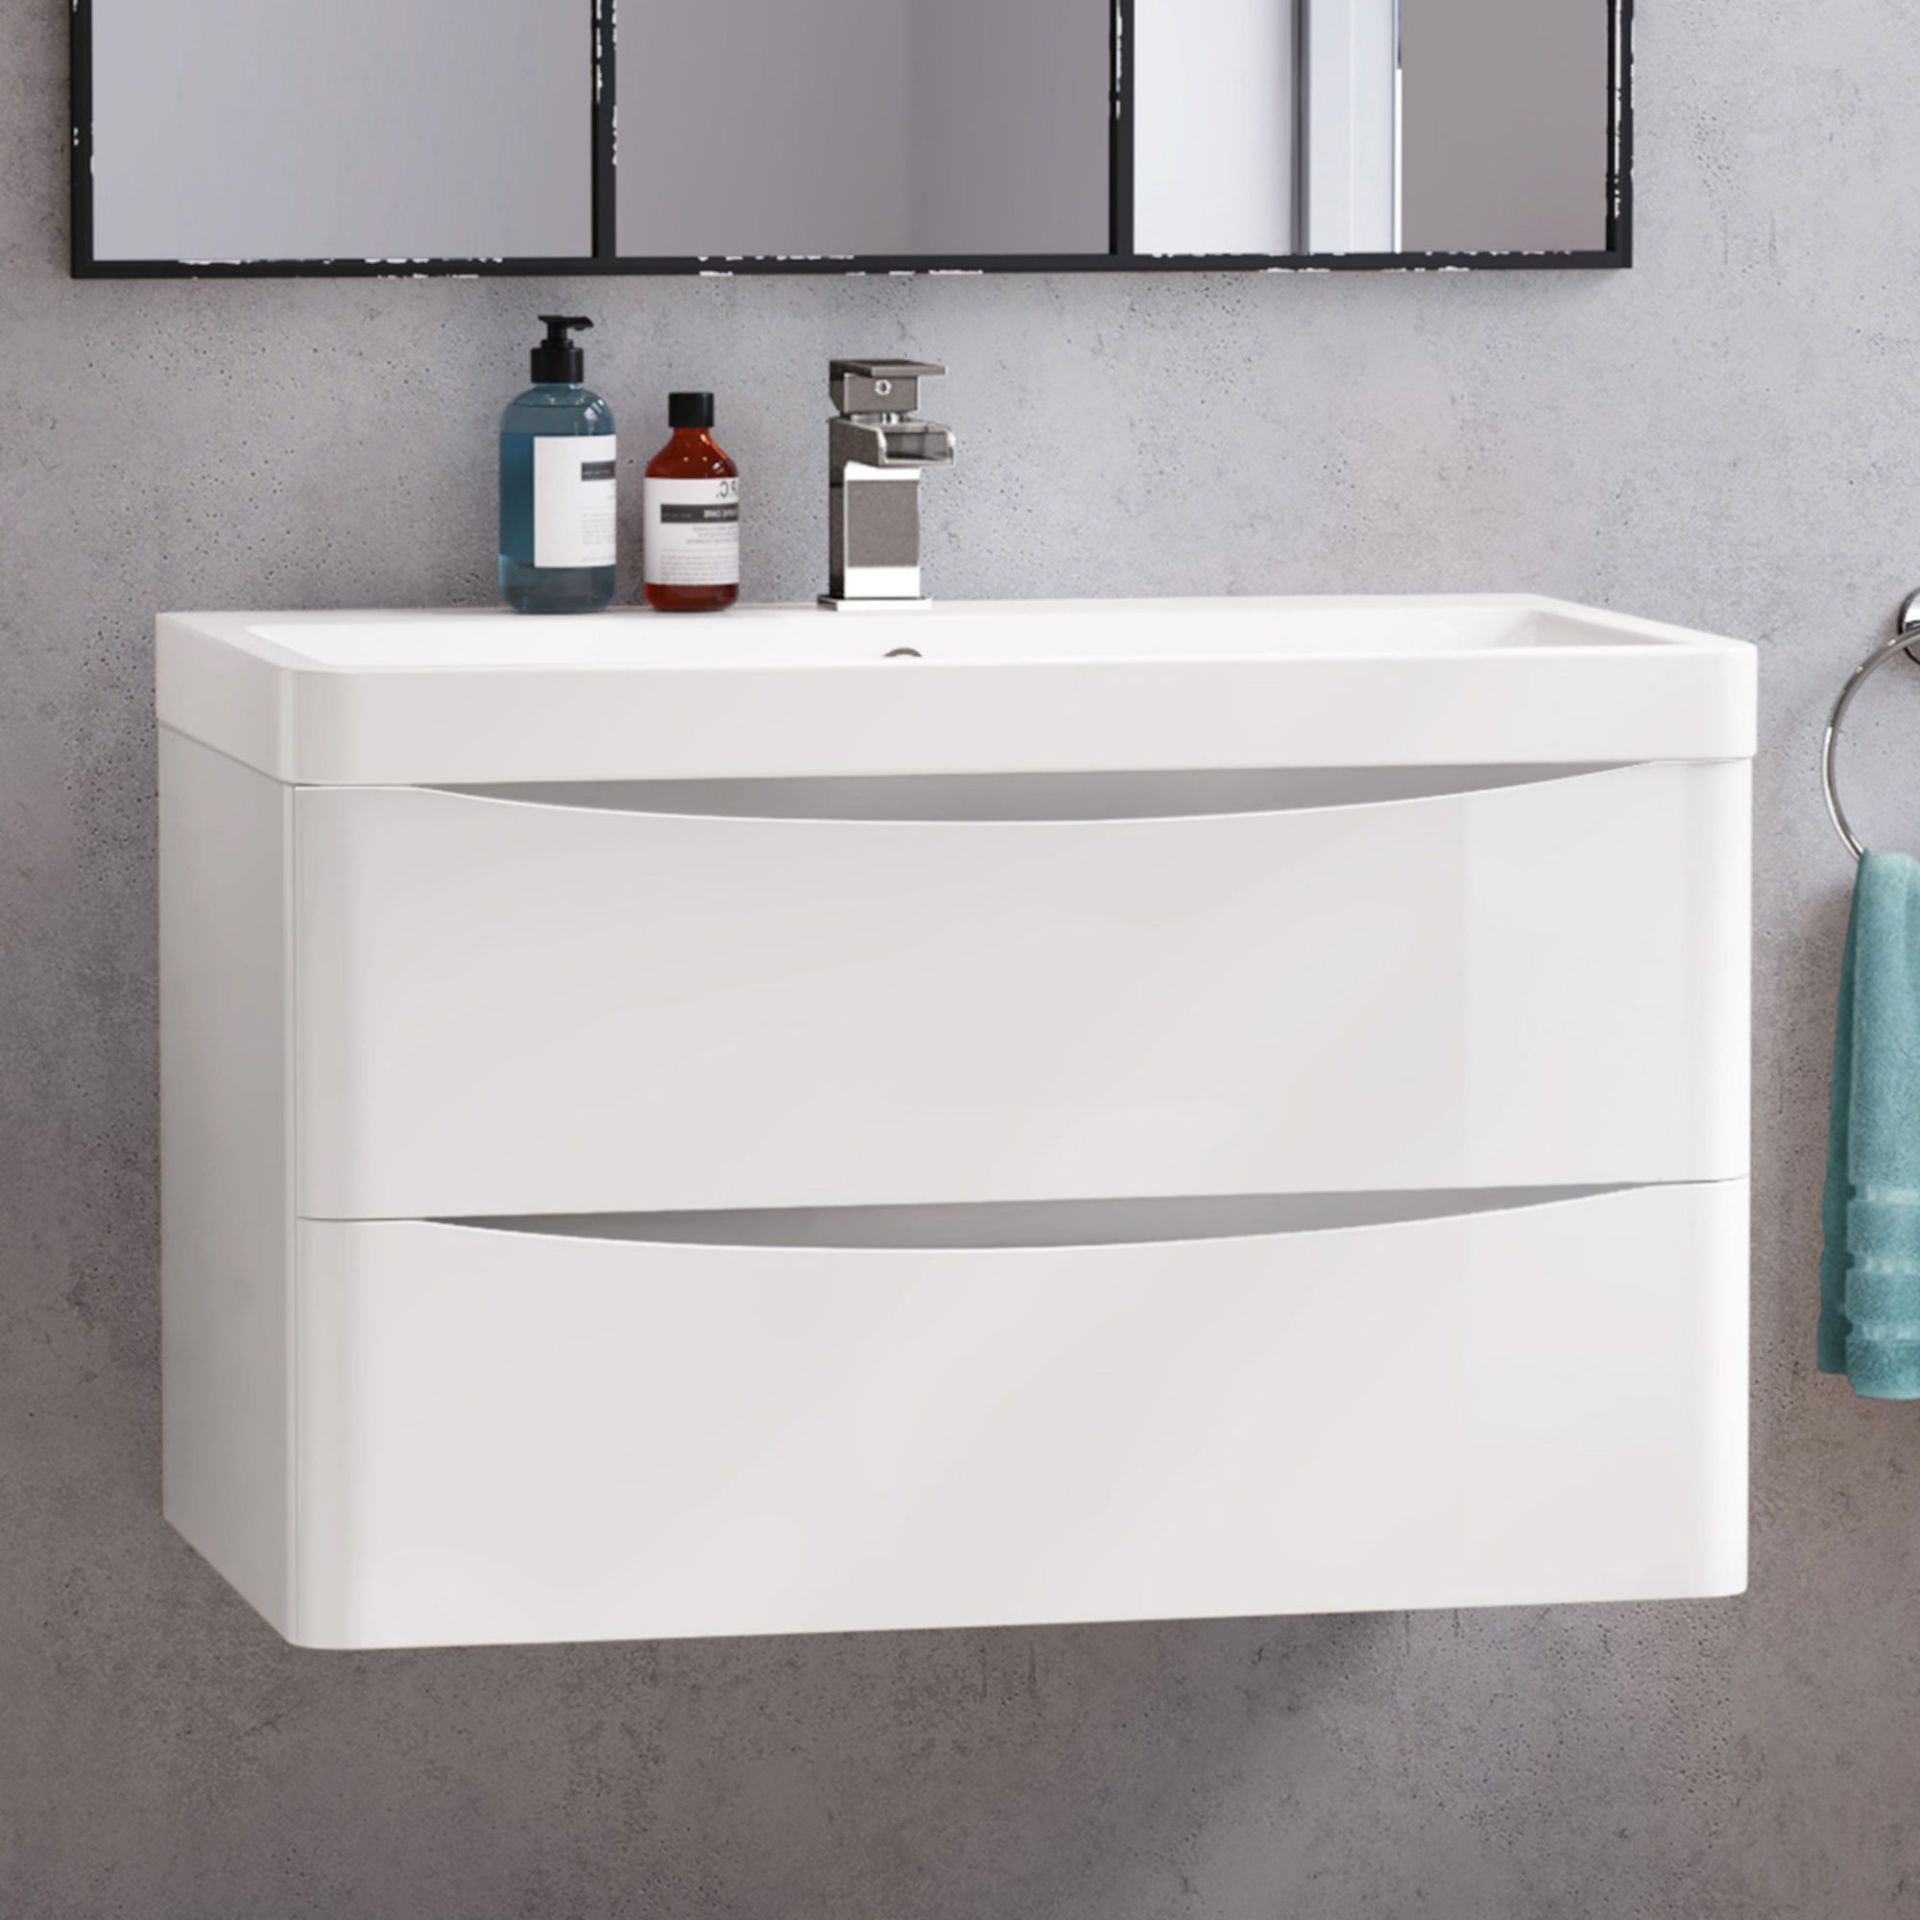 New 1000mm Austin II Gloss White Built-In Basin Drawer Unit - Wall Hung. RRP £999.99.Comes ...